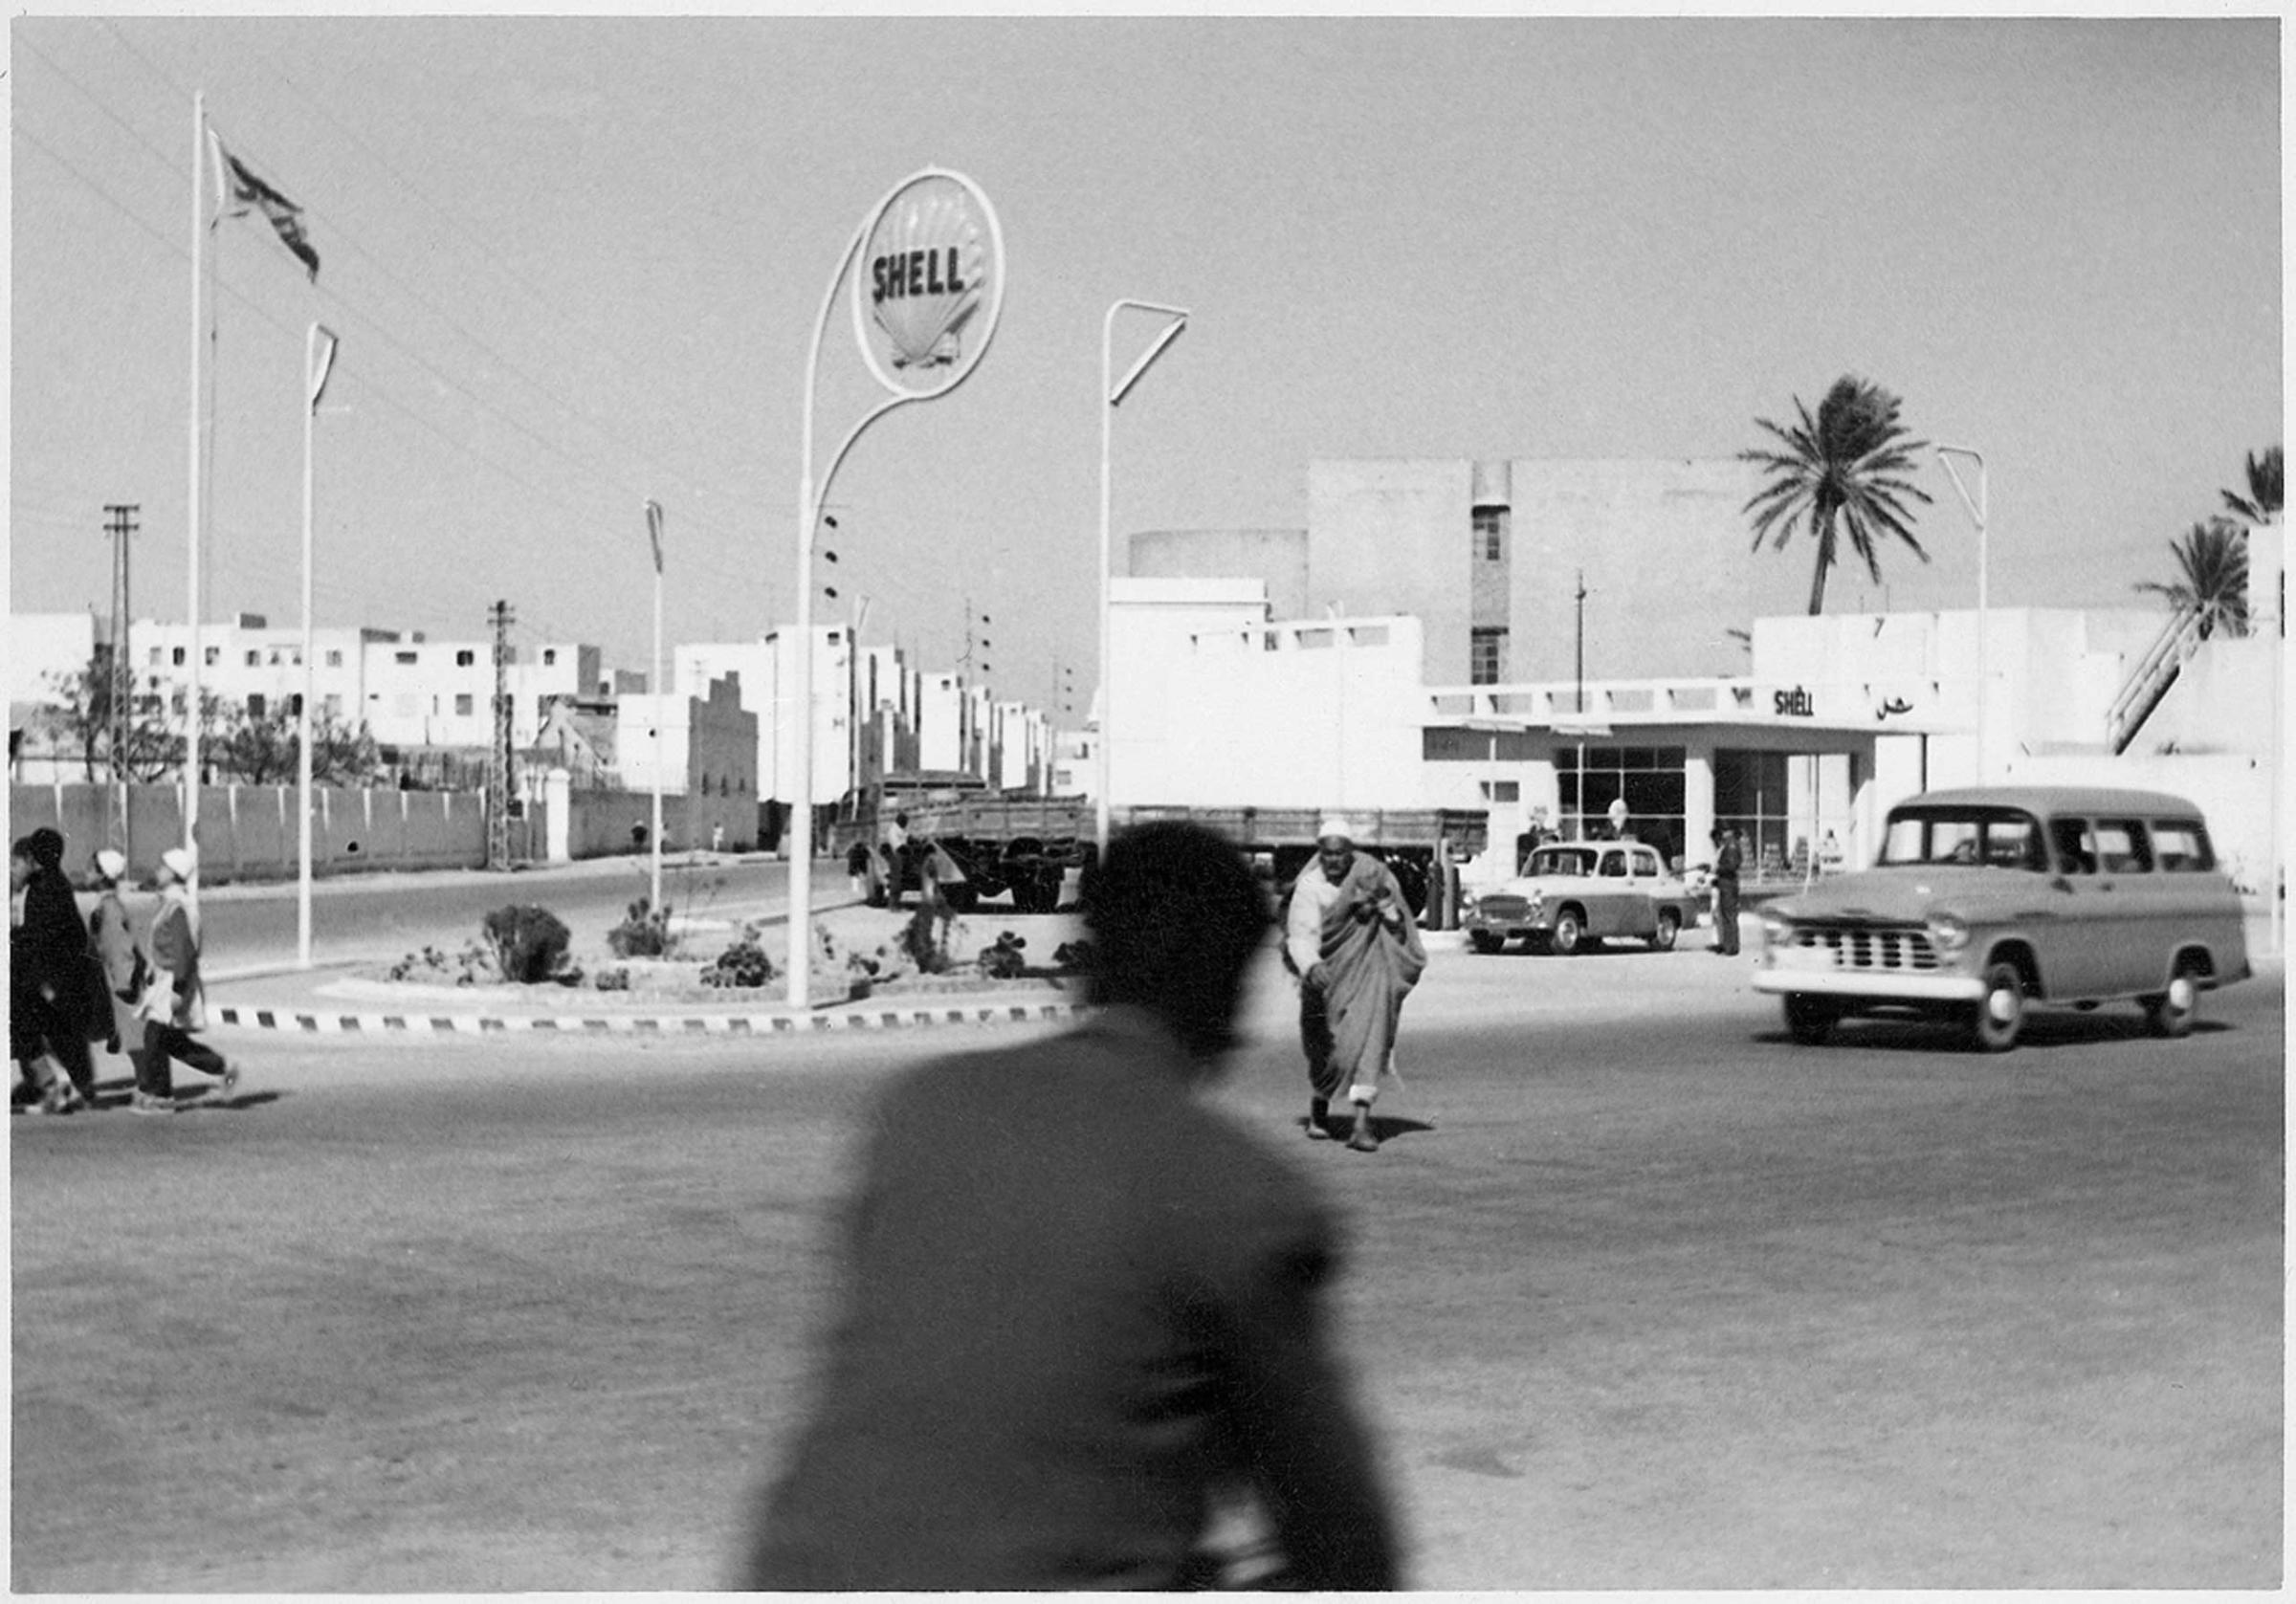 The first Shell gas station that Mohamed Nga opened in Tripoli